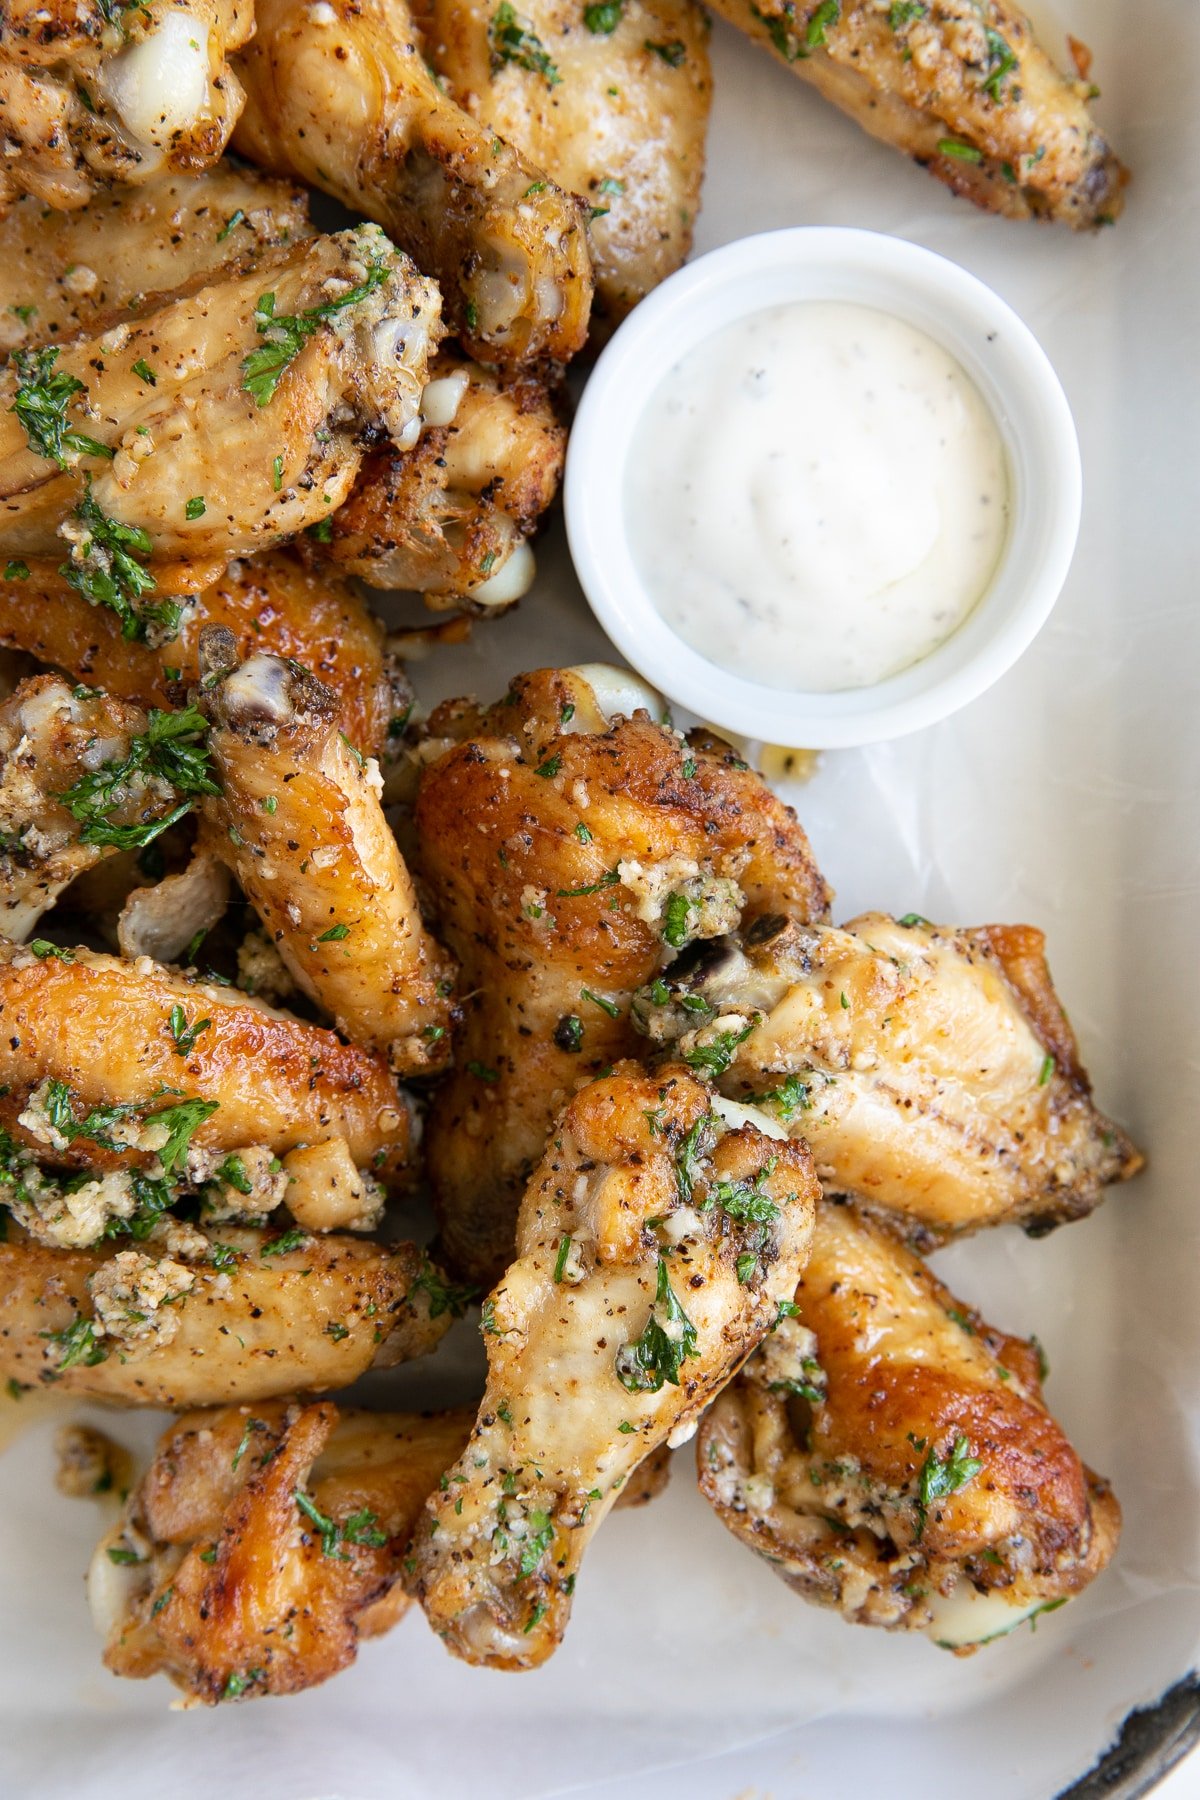 Overhead image of crispy baked chicken wings and drumettes covered in a homemade garlic parmesan sauce.